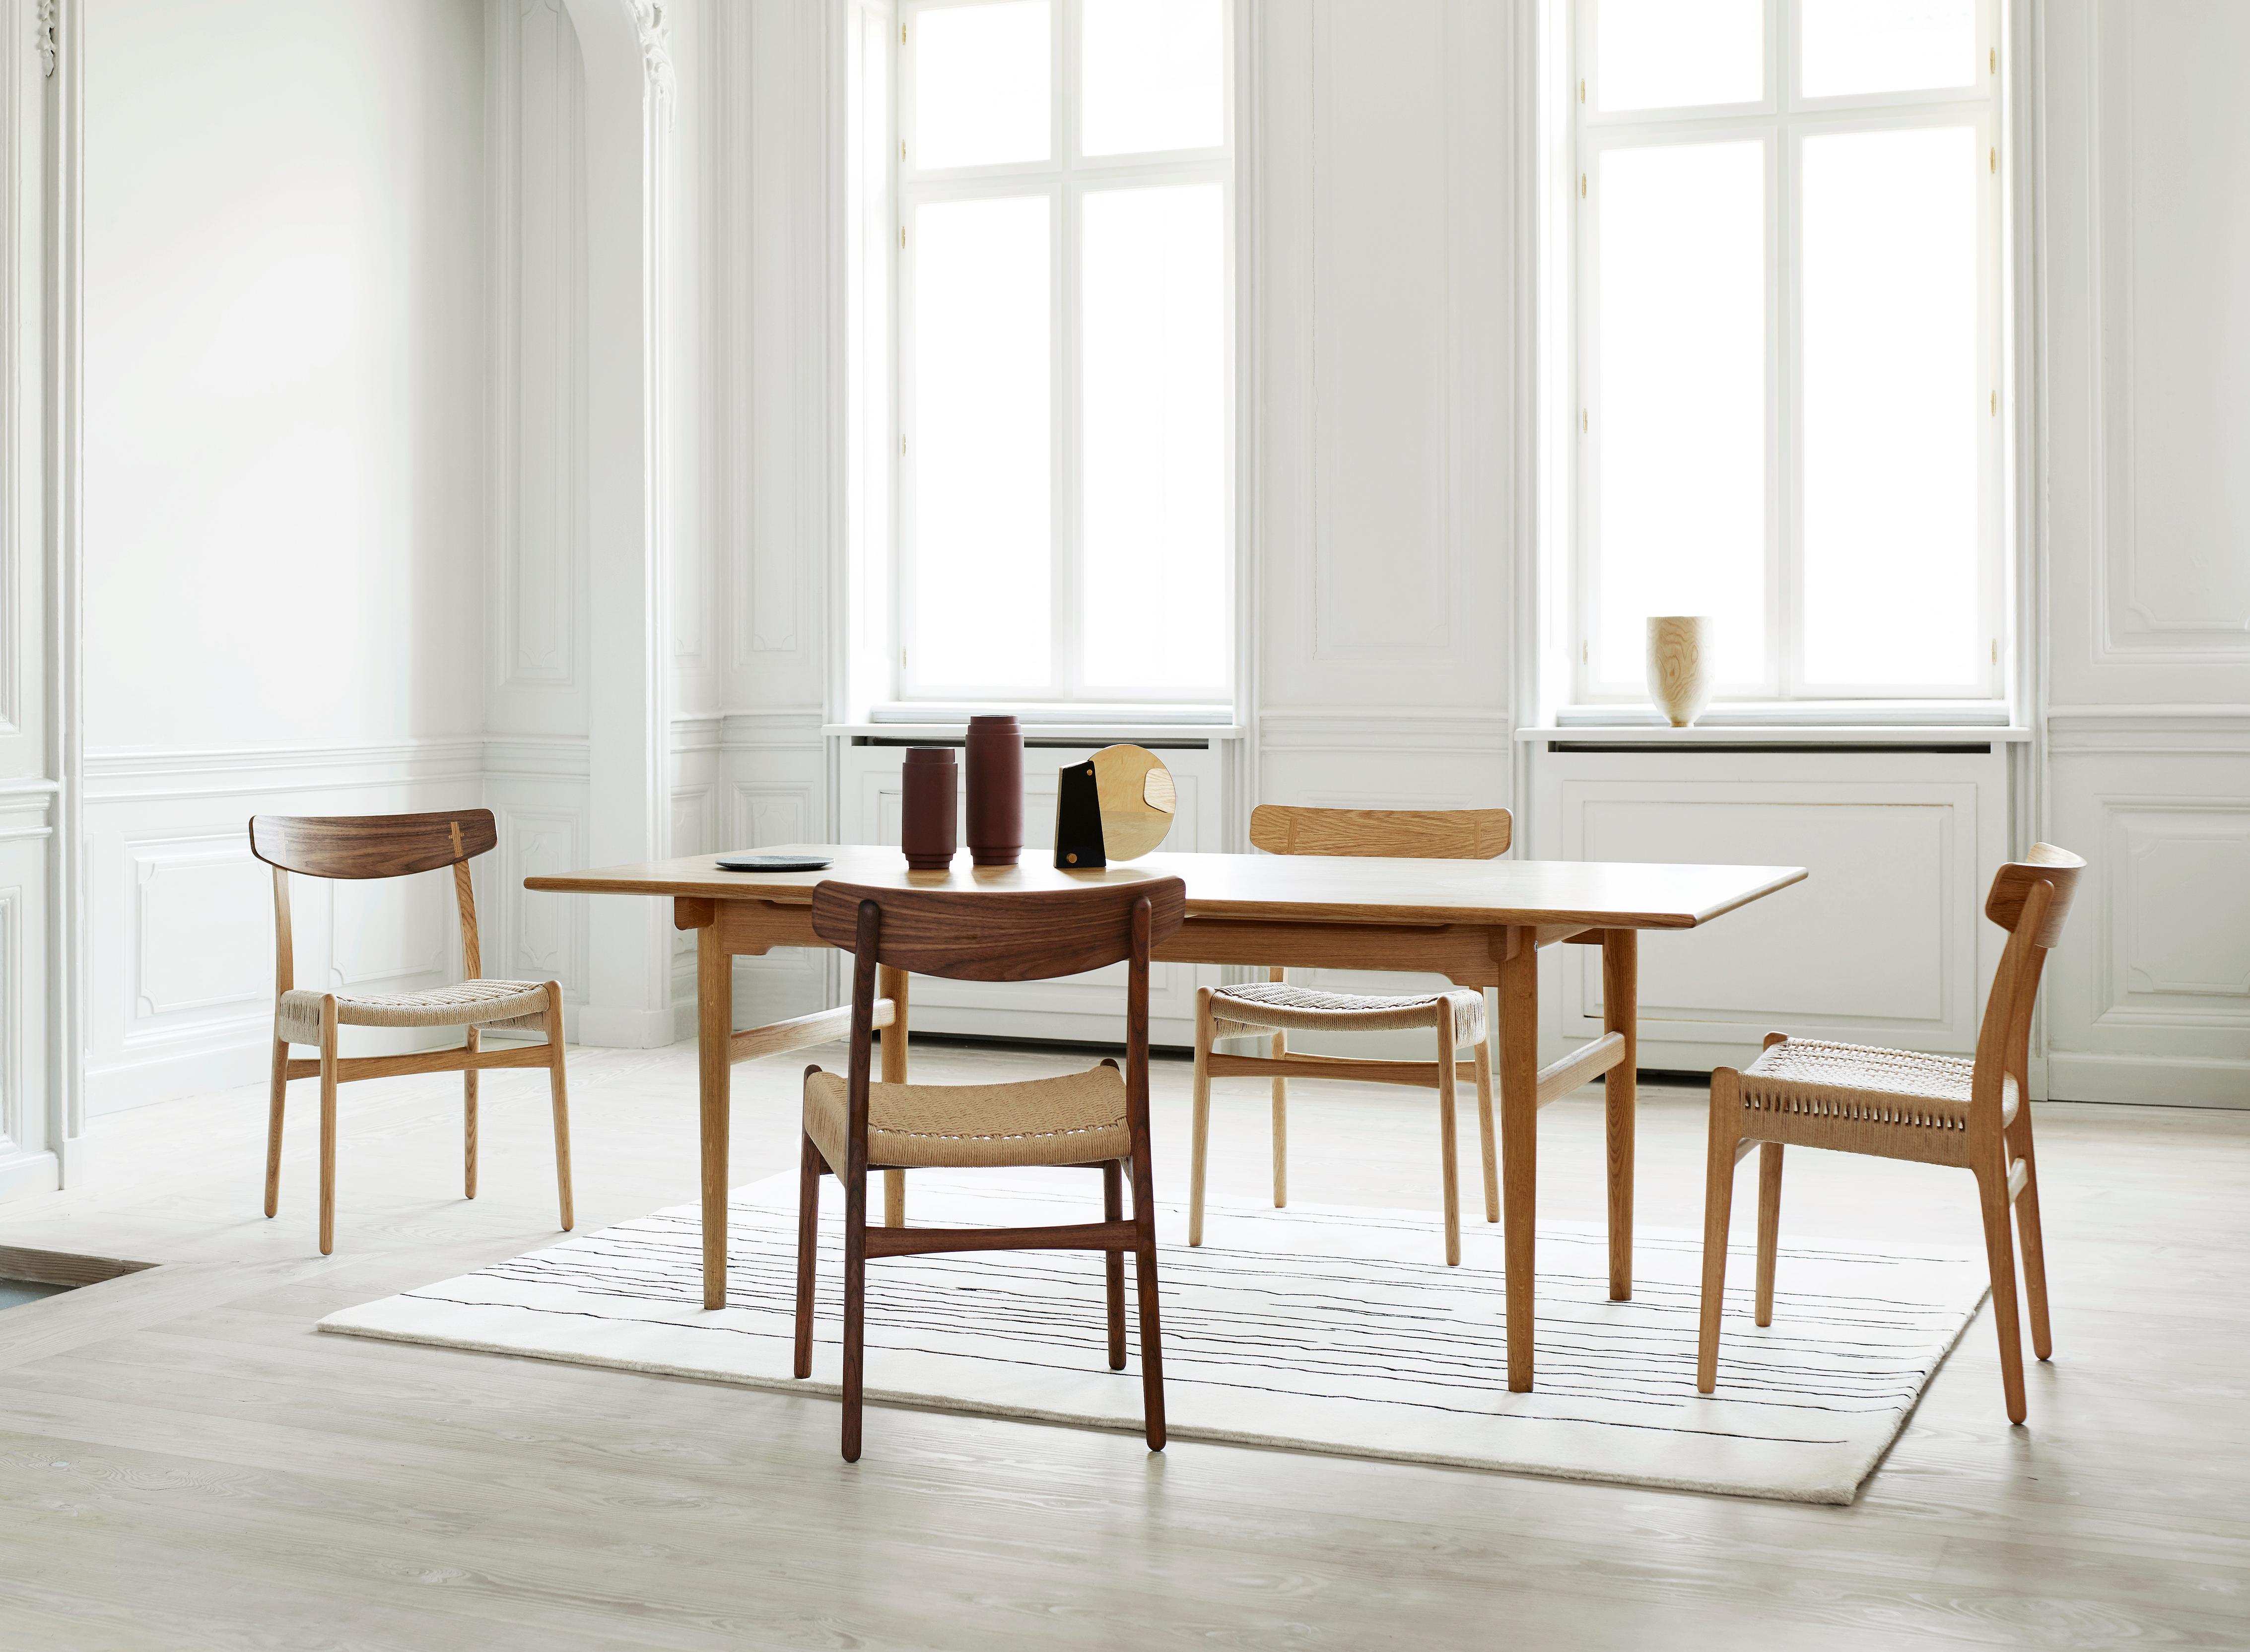 CH23 Dining Chair in Wood Finishes with Natural Papercord Seat by Hans J. Wegner 25